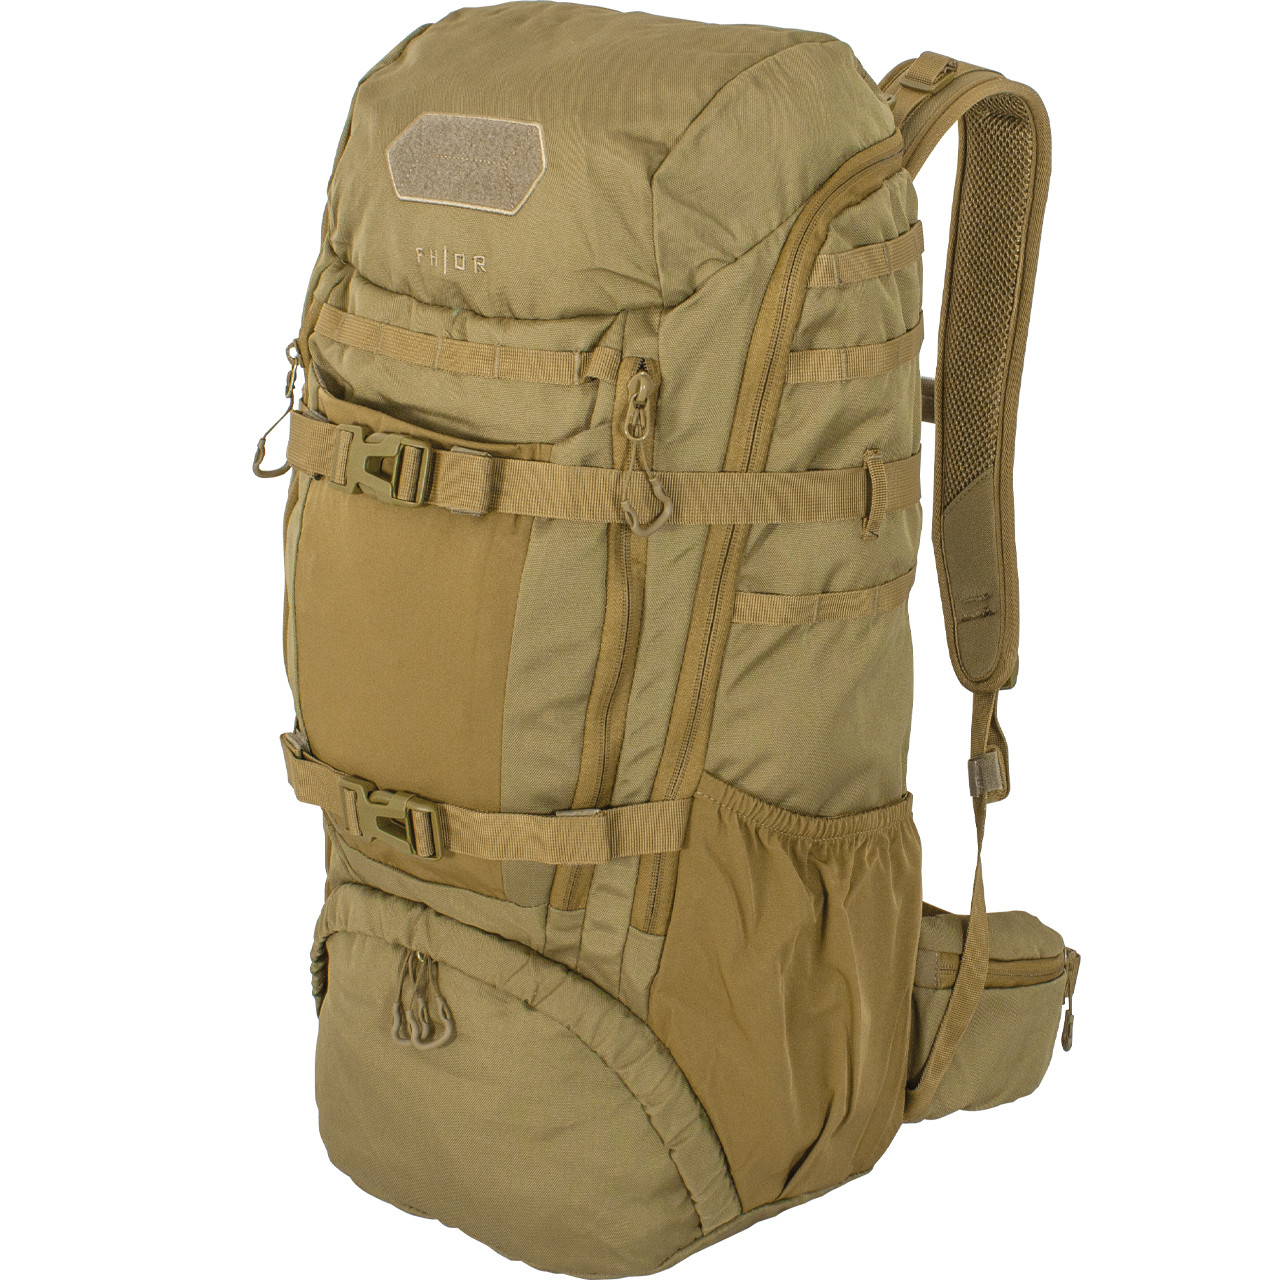 FHIOR - 40 Liter Tactical Pack - Coyote - Front Left